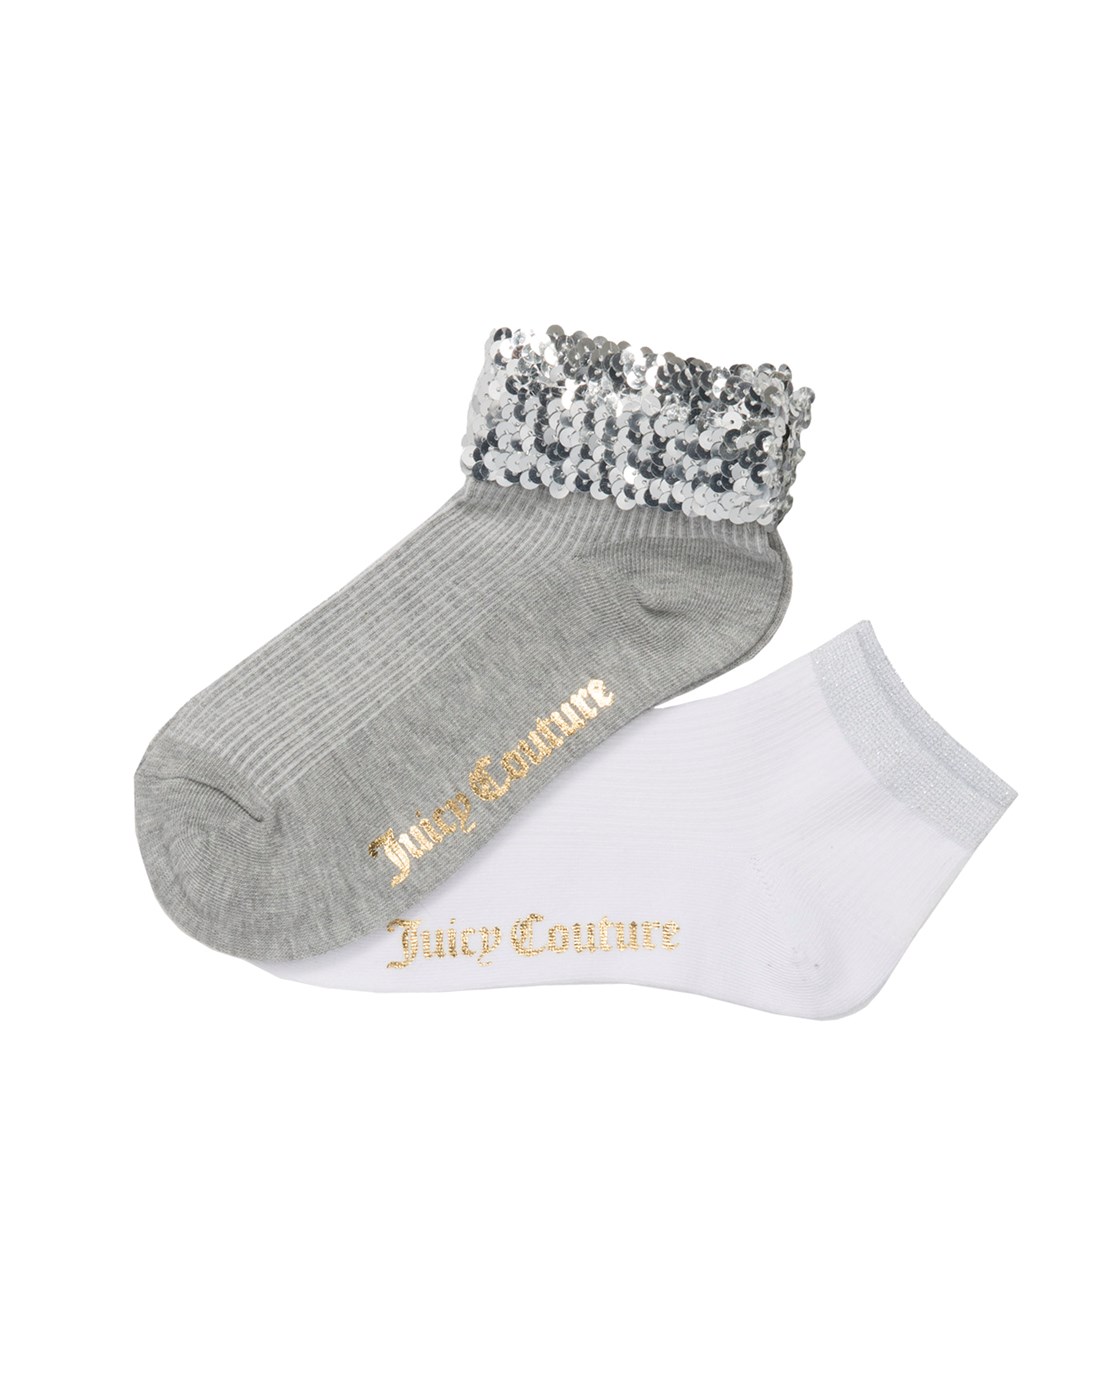 Juicy Couture Sequin Welt Rib Anklet Set